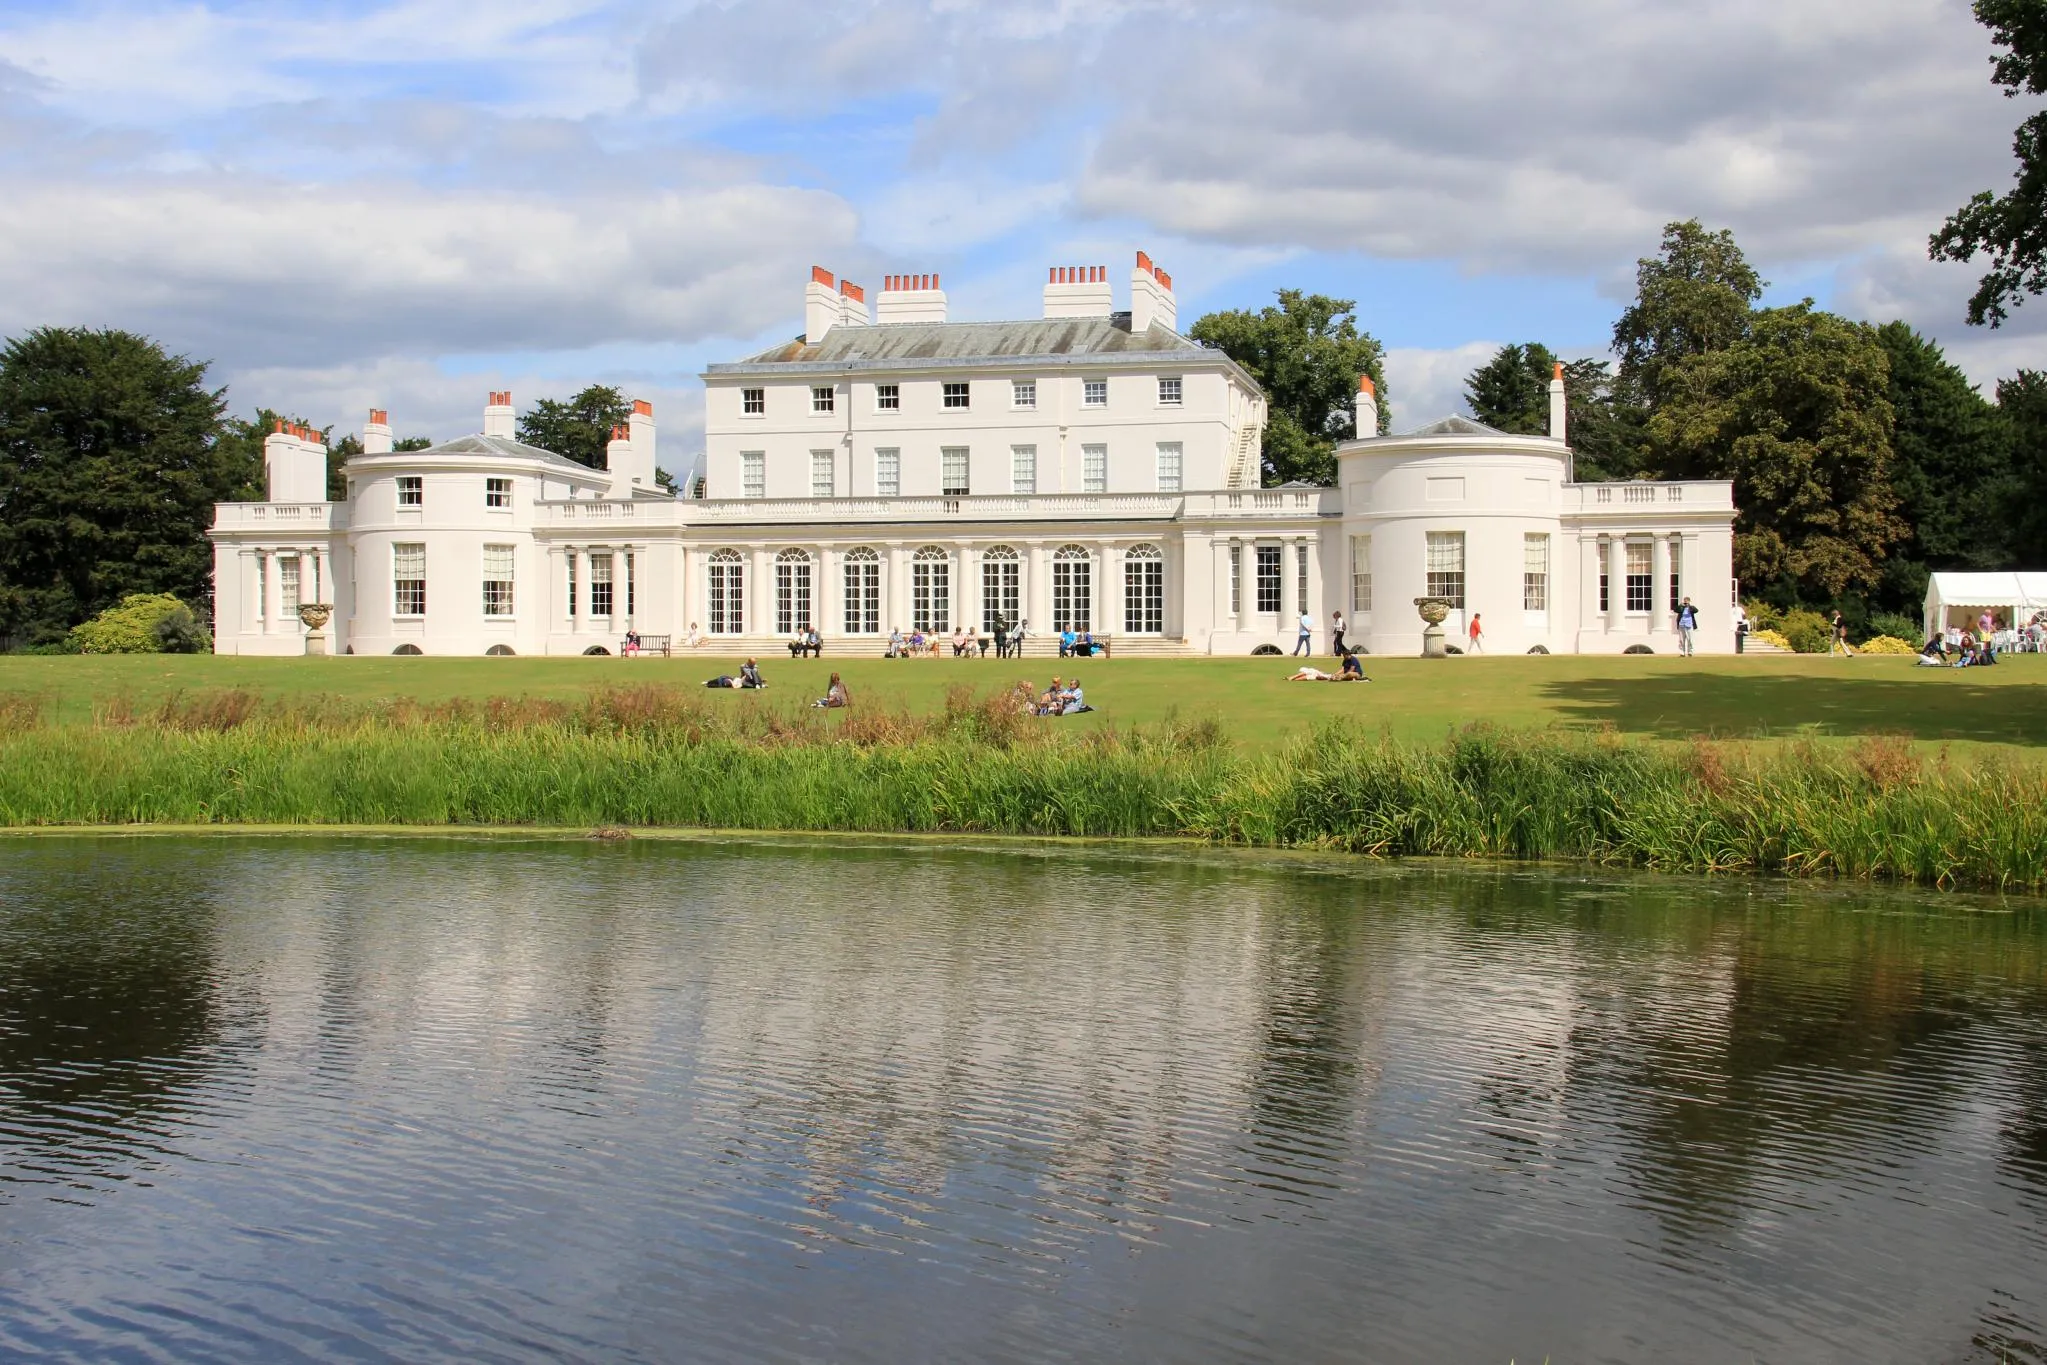 Photo showing: Frogmore House is a 17th Century country house standing at the centre of the Frogmore Estate, amongst beautiful gardens and about a half a mile south of Windsor Castle, situated in the tranquil setting of the private Home Park. It is a Grade I listed building.
A country residence of various monarchs, the house is especially linked to Queen Victoria. The house and attractive gardens were one of Queen Victoria's favourite retreats. In the gardens stands the Mausoleum where Queen Victoria and her husband Prince Albert are buried.

Today, Frogmore House is no longer a Royal residence, but the house and gardens are sometimes used by the Royal Family for official purposes such as receptions.